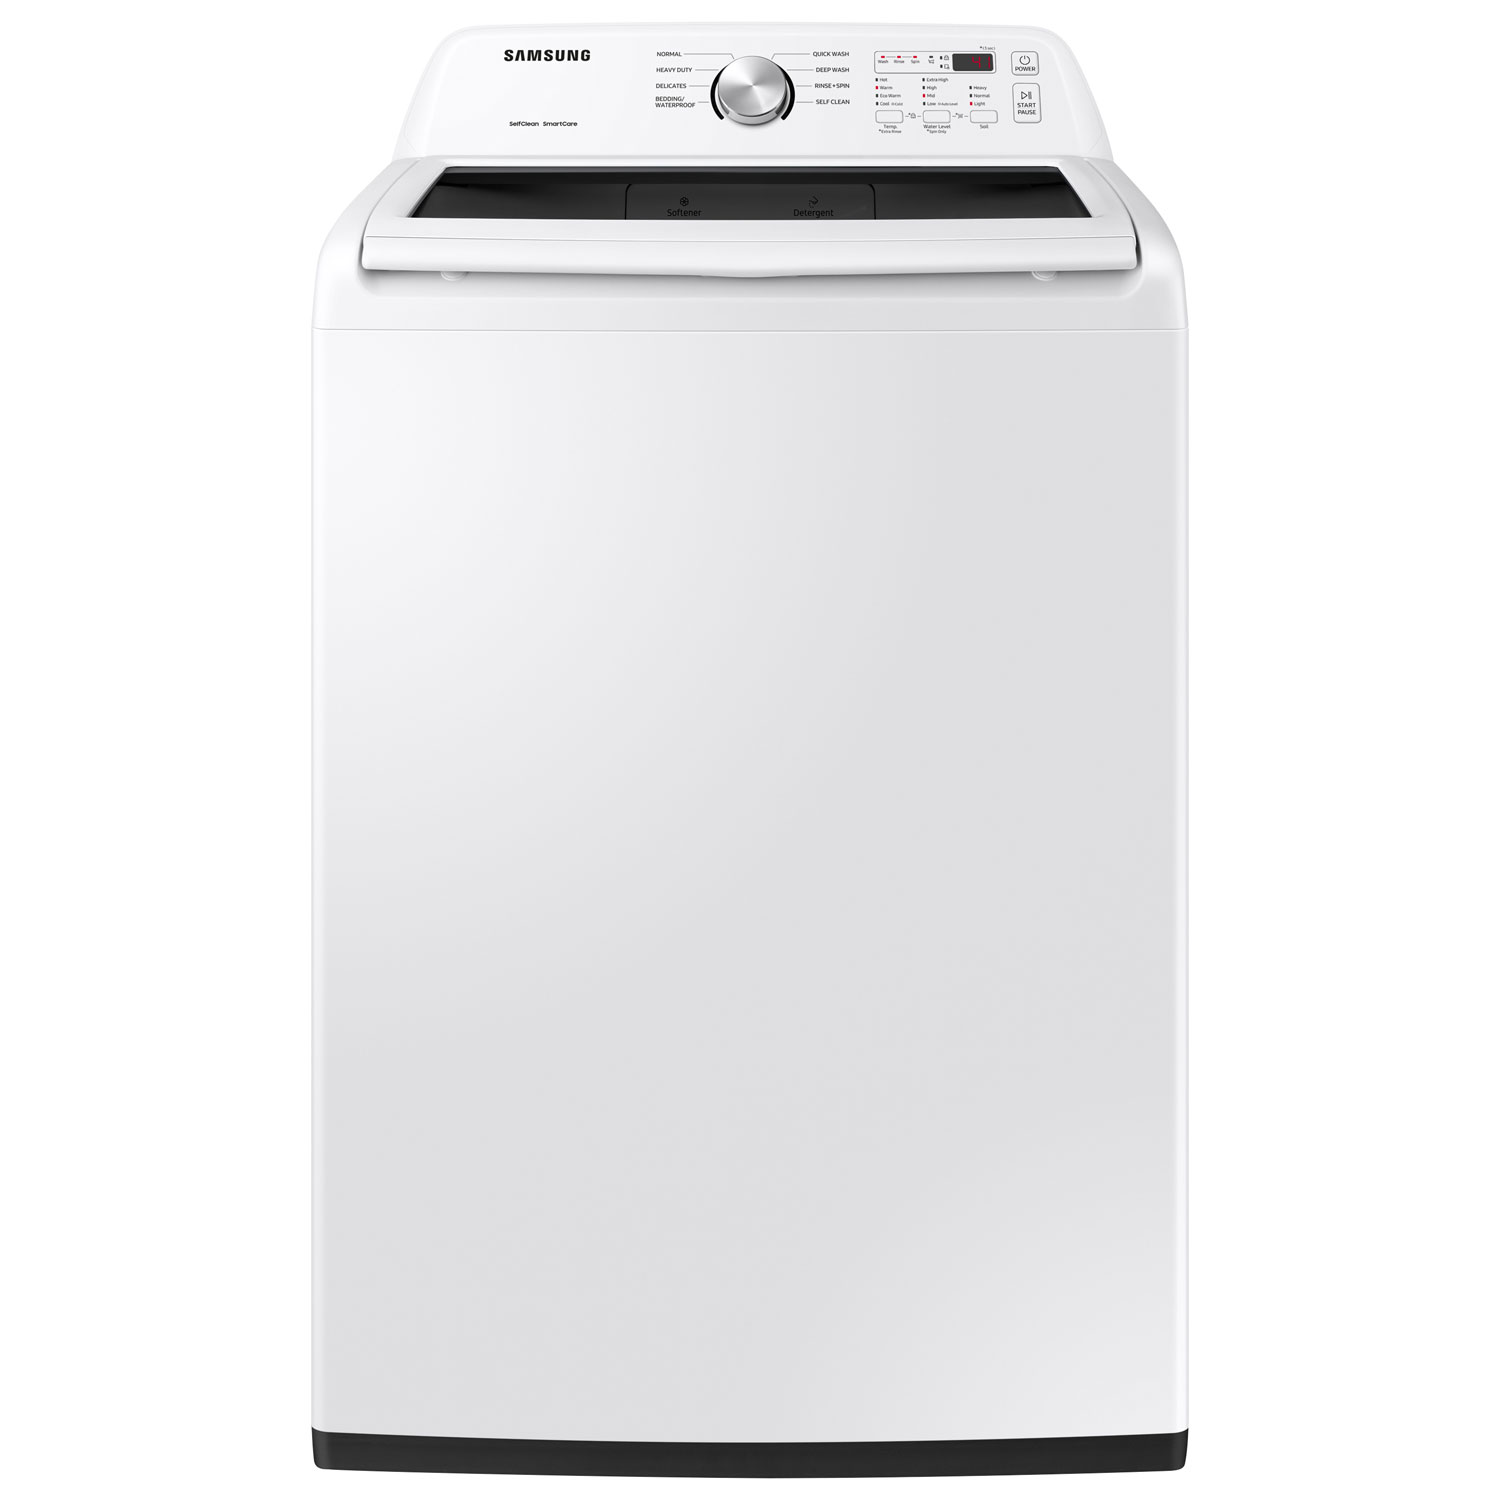 Samsung 5.2 Cu. Ft. High Efficiency Top Load Washer (WA45T3200AW) - White